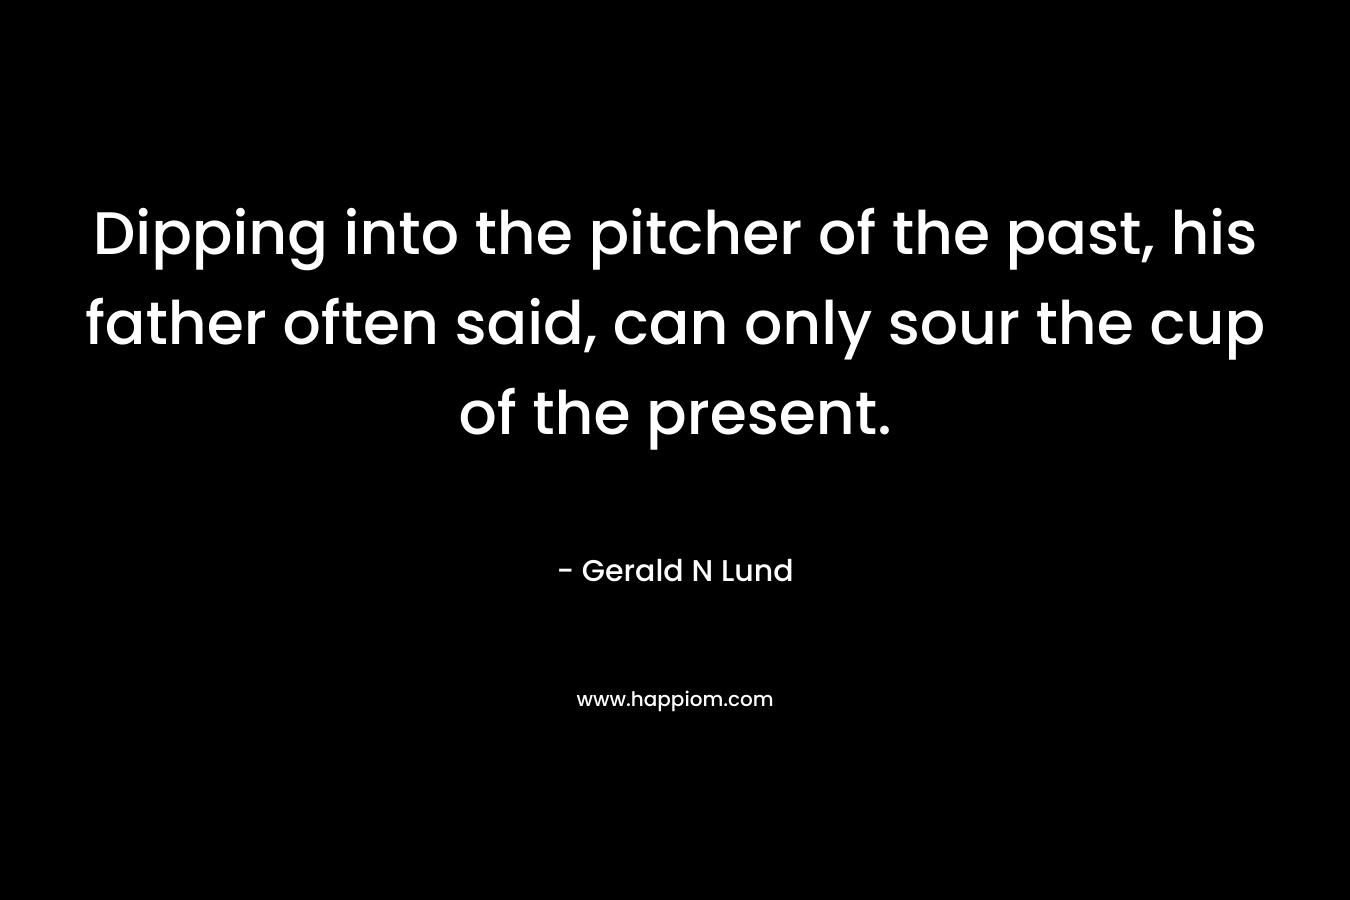 Dipping into the pitcher of the past, his father often said, can only sour the cup of the present. – Gerald N Lund